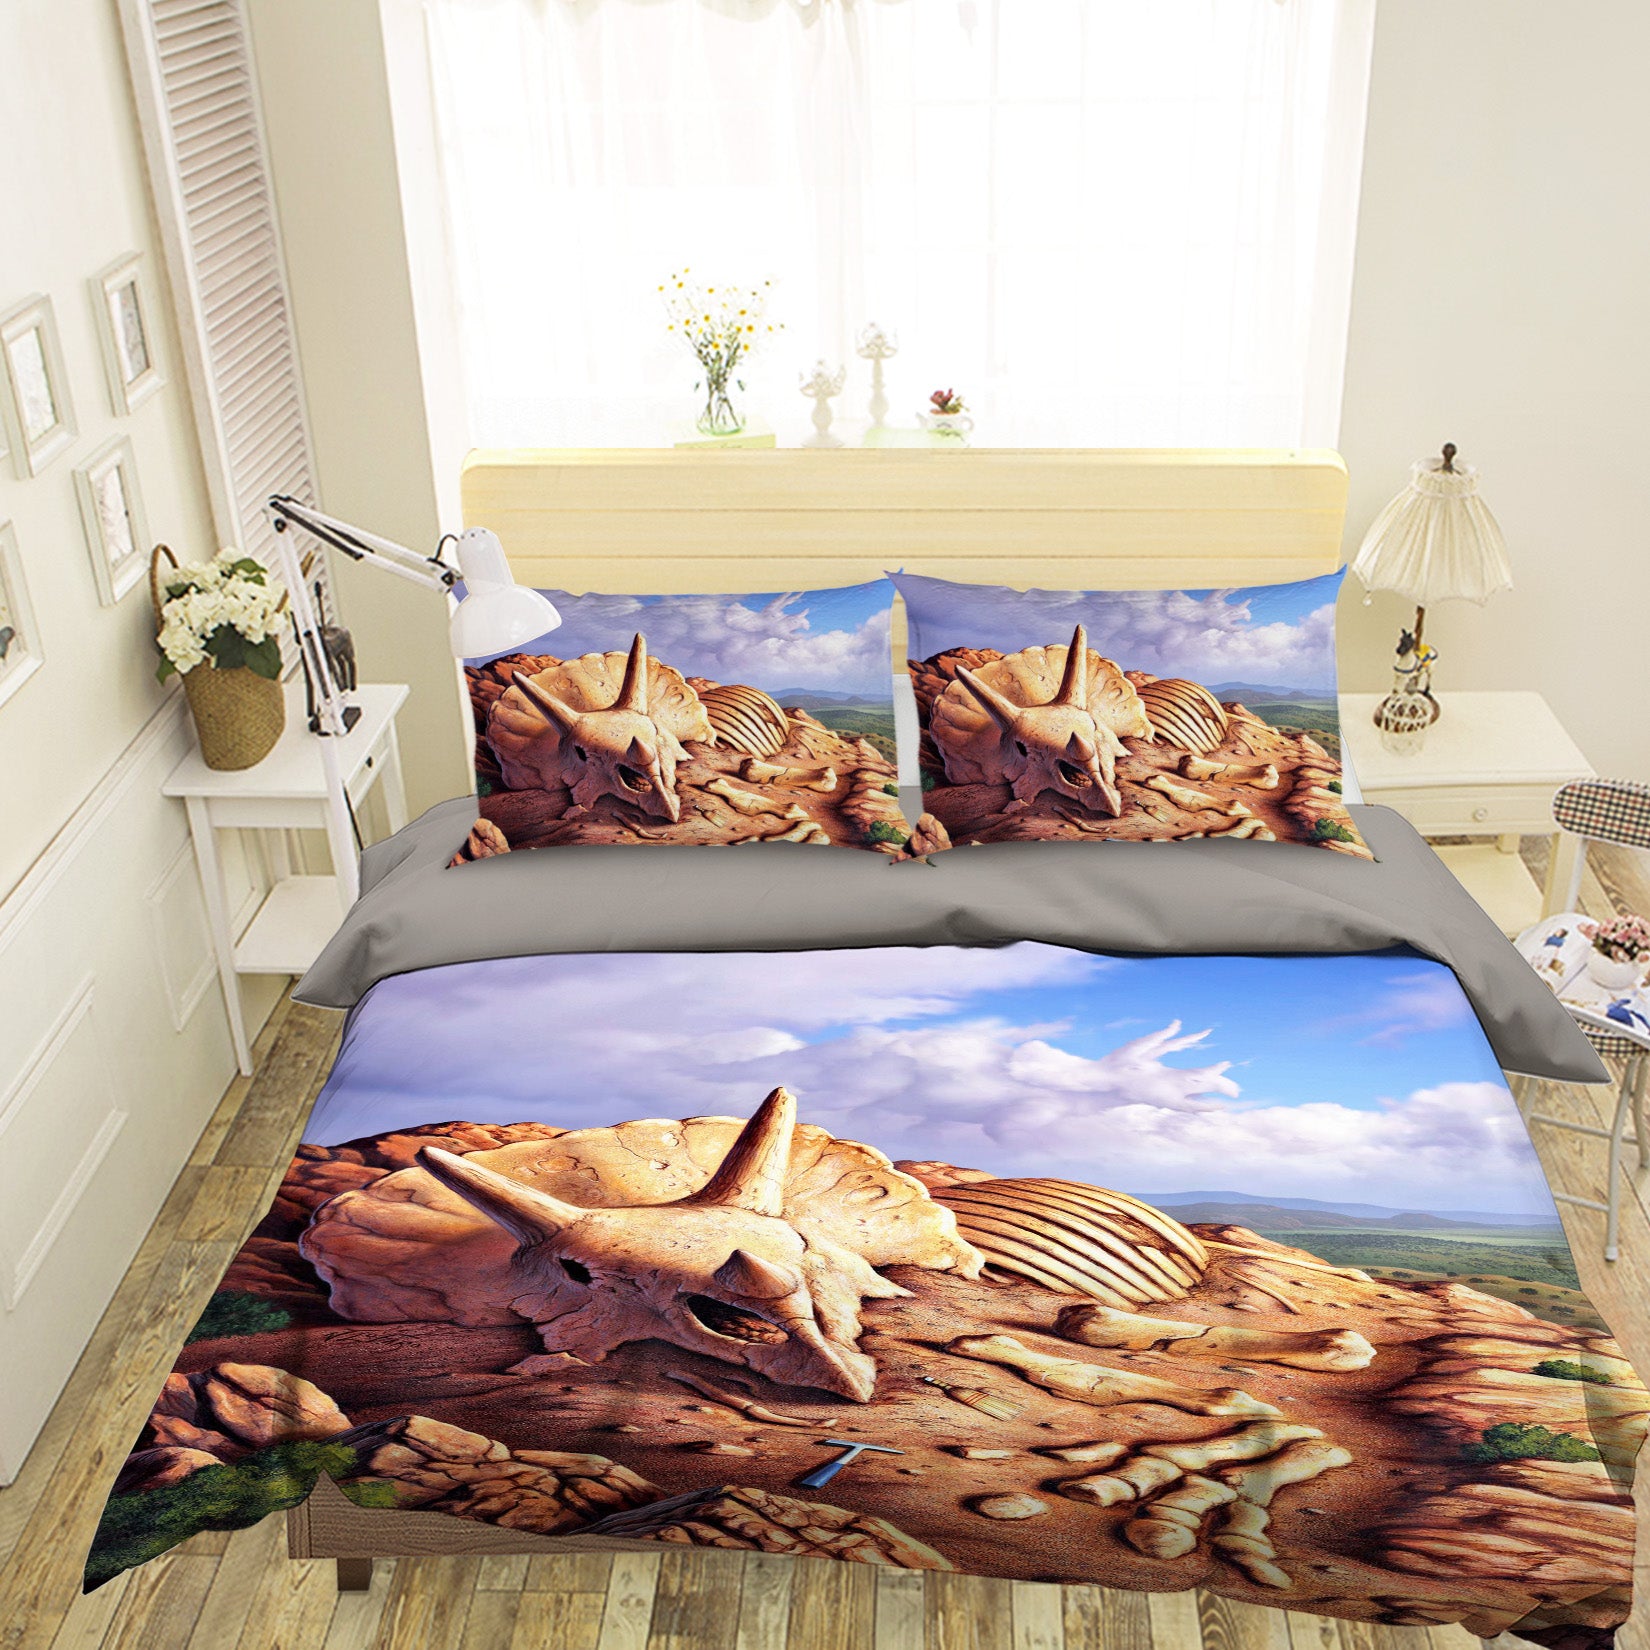 3D Dino Dig 2117 Jerry LoFaro bedding Bed Pillowcases Quilt